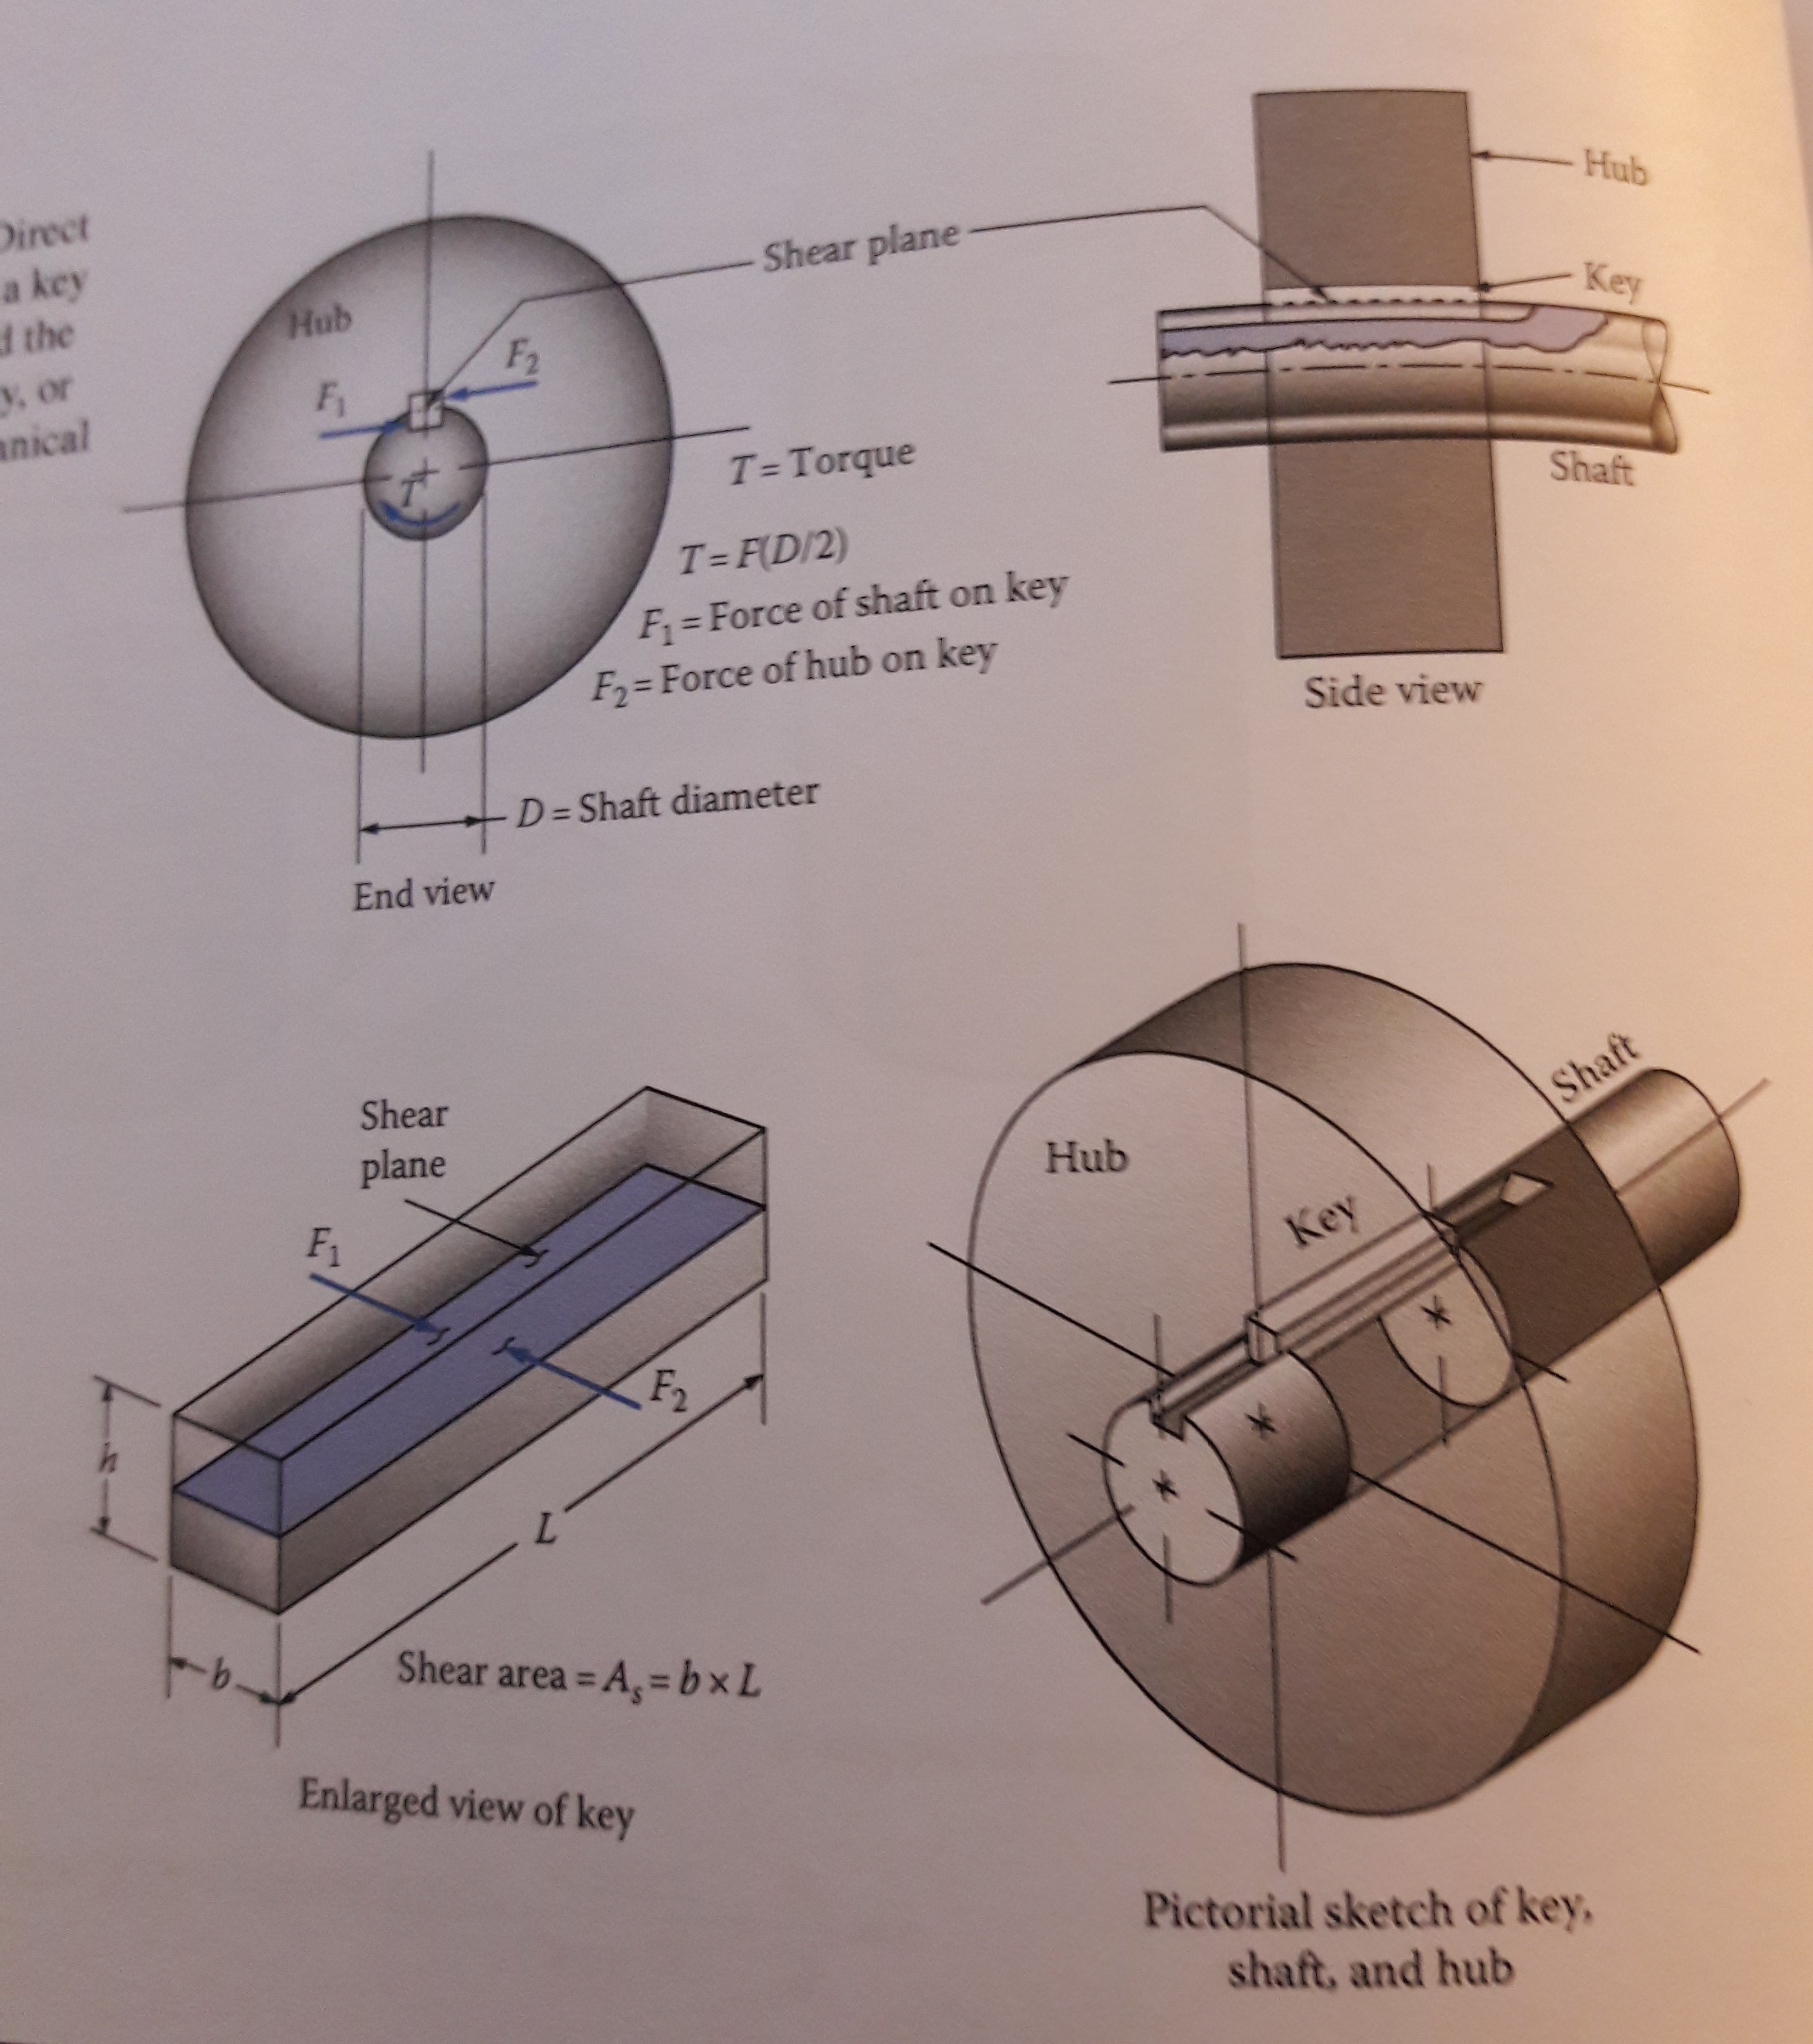 Direct
a key
d the
Hub
Shear plane
Hub
Key
F2
y, or
anical
F1
T=Torque
Shaft
T=F(D/2)
F = Force of shaft on key
F= Force of hub on key
Side view
-D Shaft diameter
End view
Shear
Shaft
plane
Hub
F1
Key
F2
Shear area = A, = bxL
%3D
Enlarged view of key
Pictorial sketch of key,
shaft, and hub
Ноу
